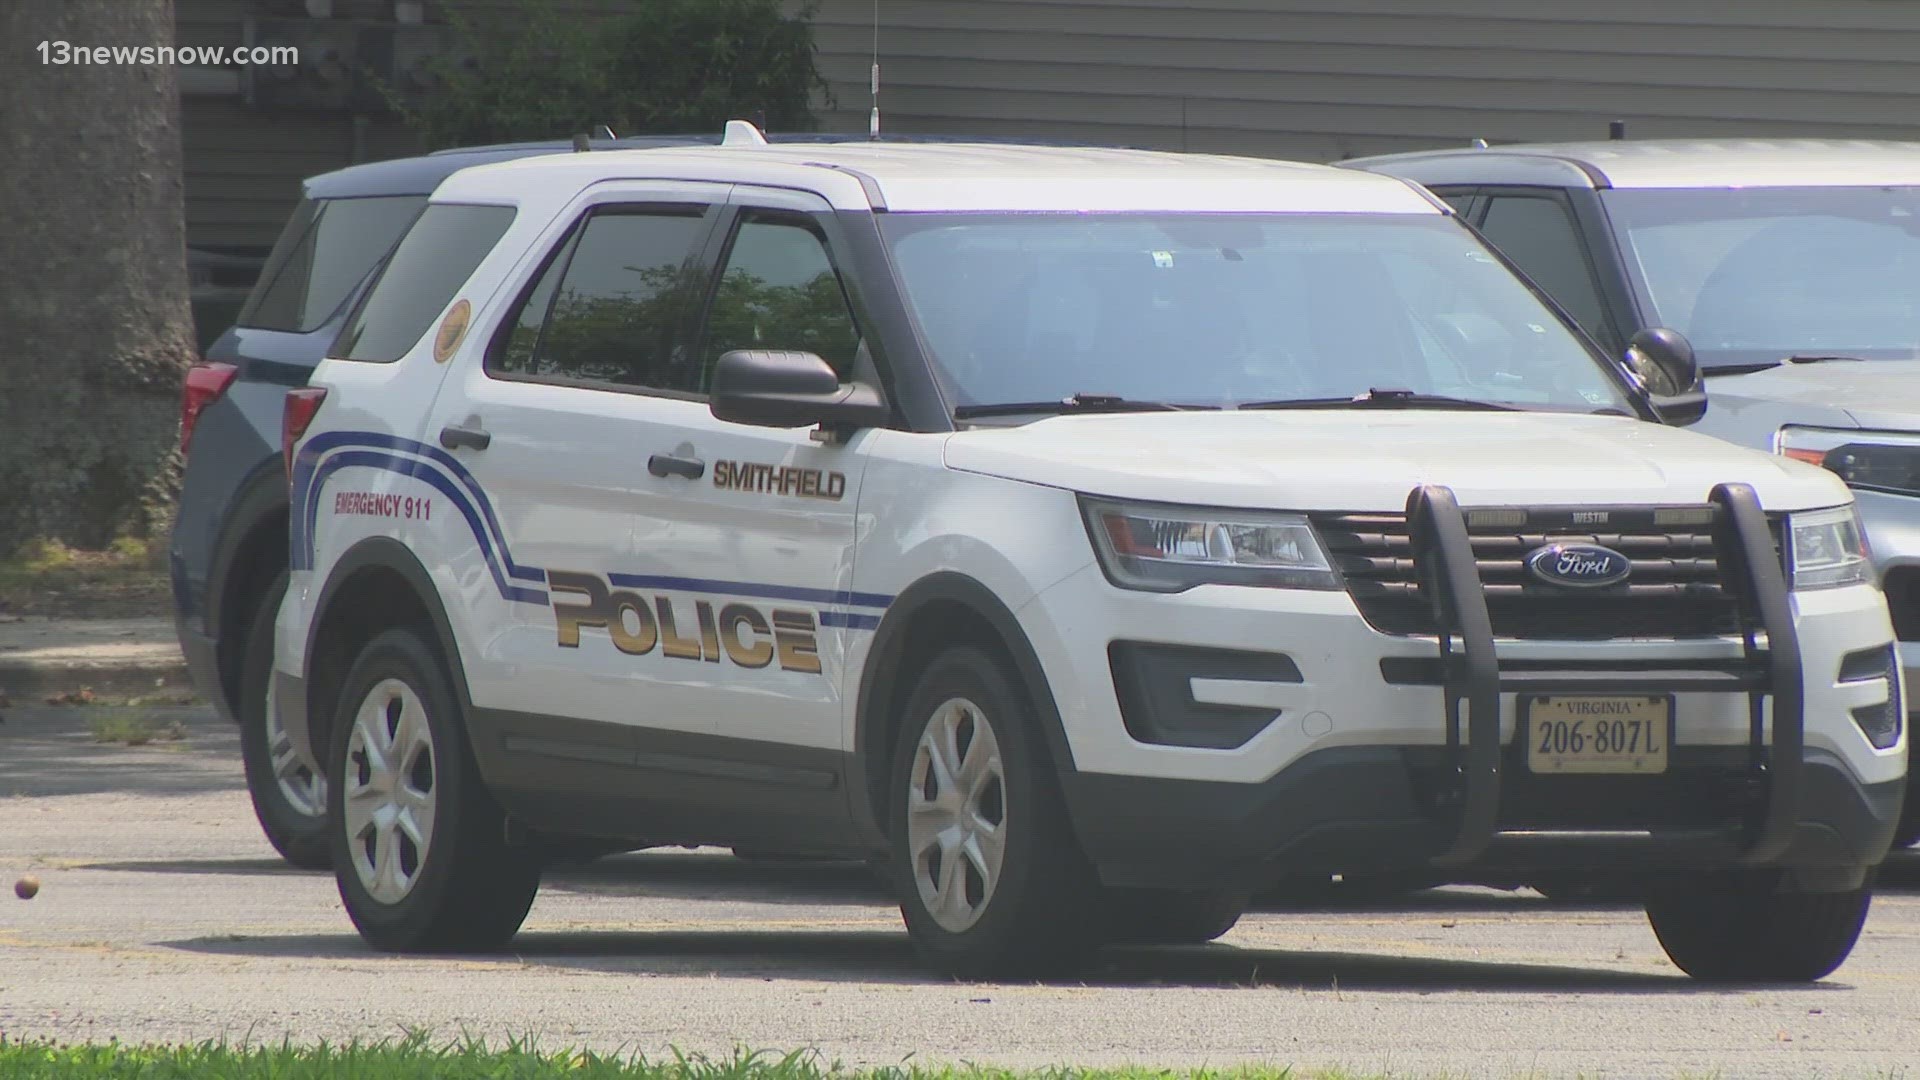 Smithfield police said a "tragic incident" is now being investigated as a double homicide, after two people were found dead at an apartment complex on Tuesday.